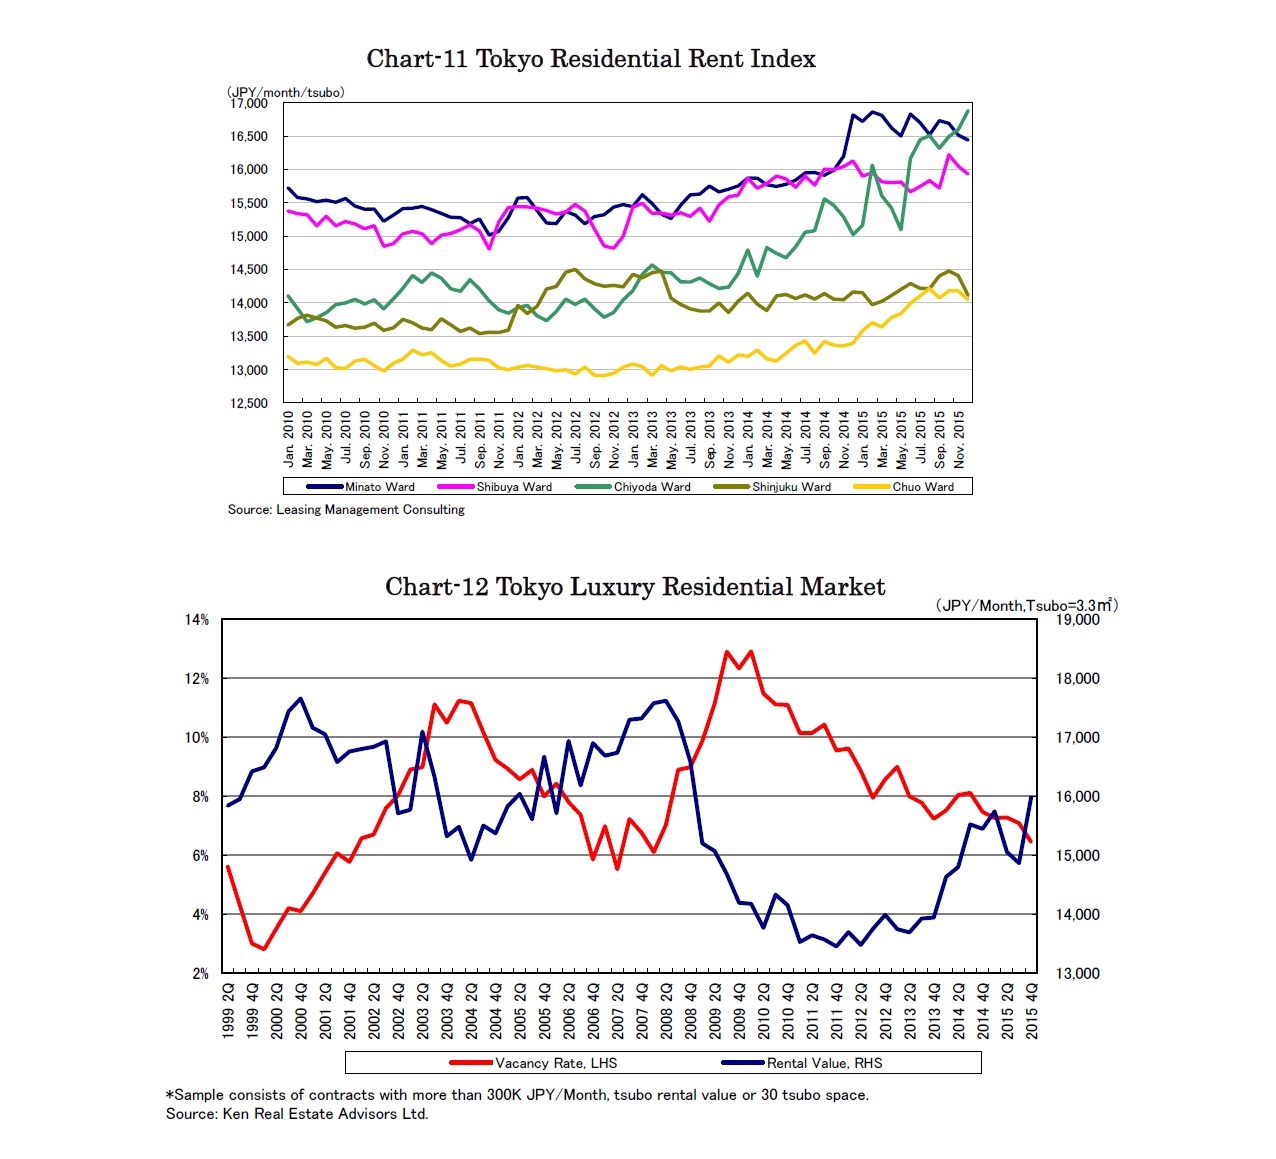 Chart-11 Tokyo Residential Rent Index/Chart-12 Tokyo Luxury Residential Market